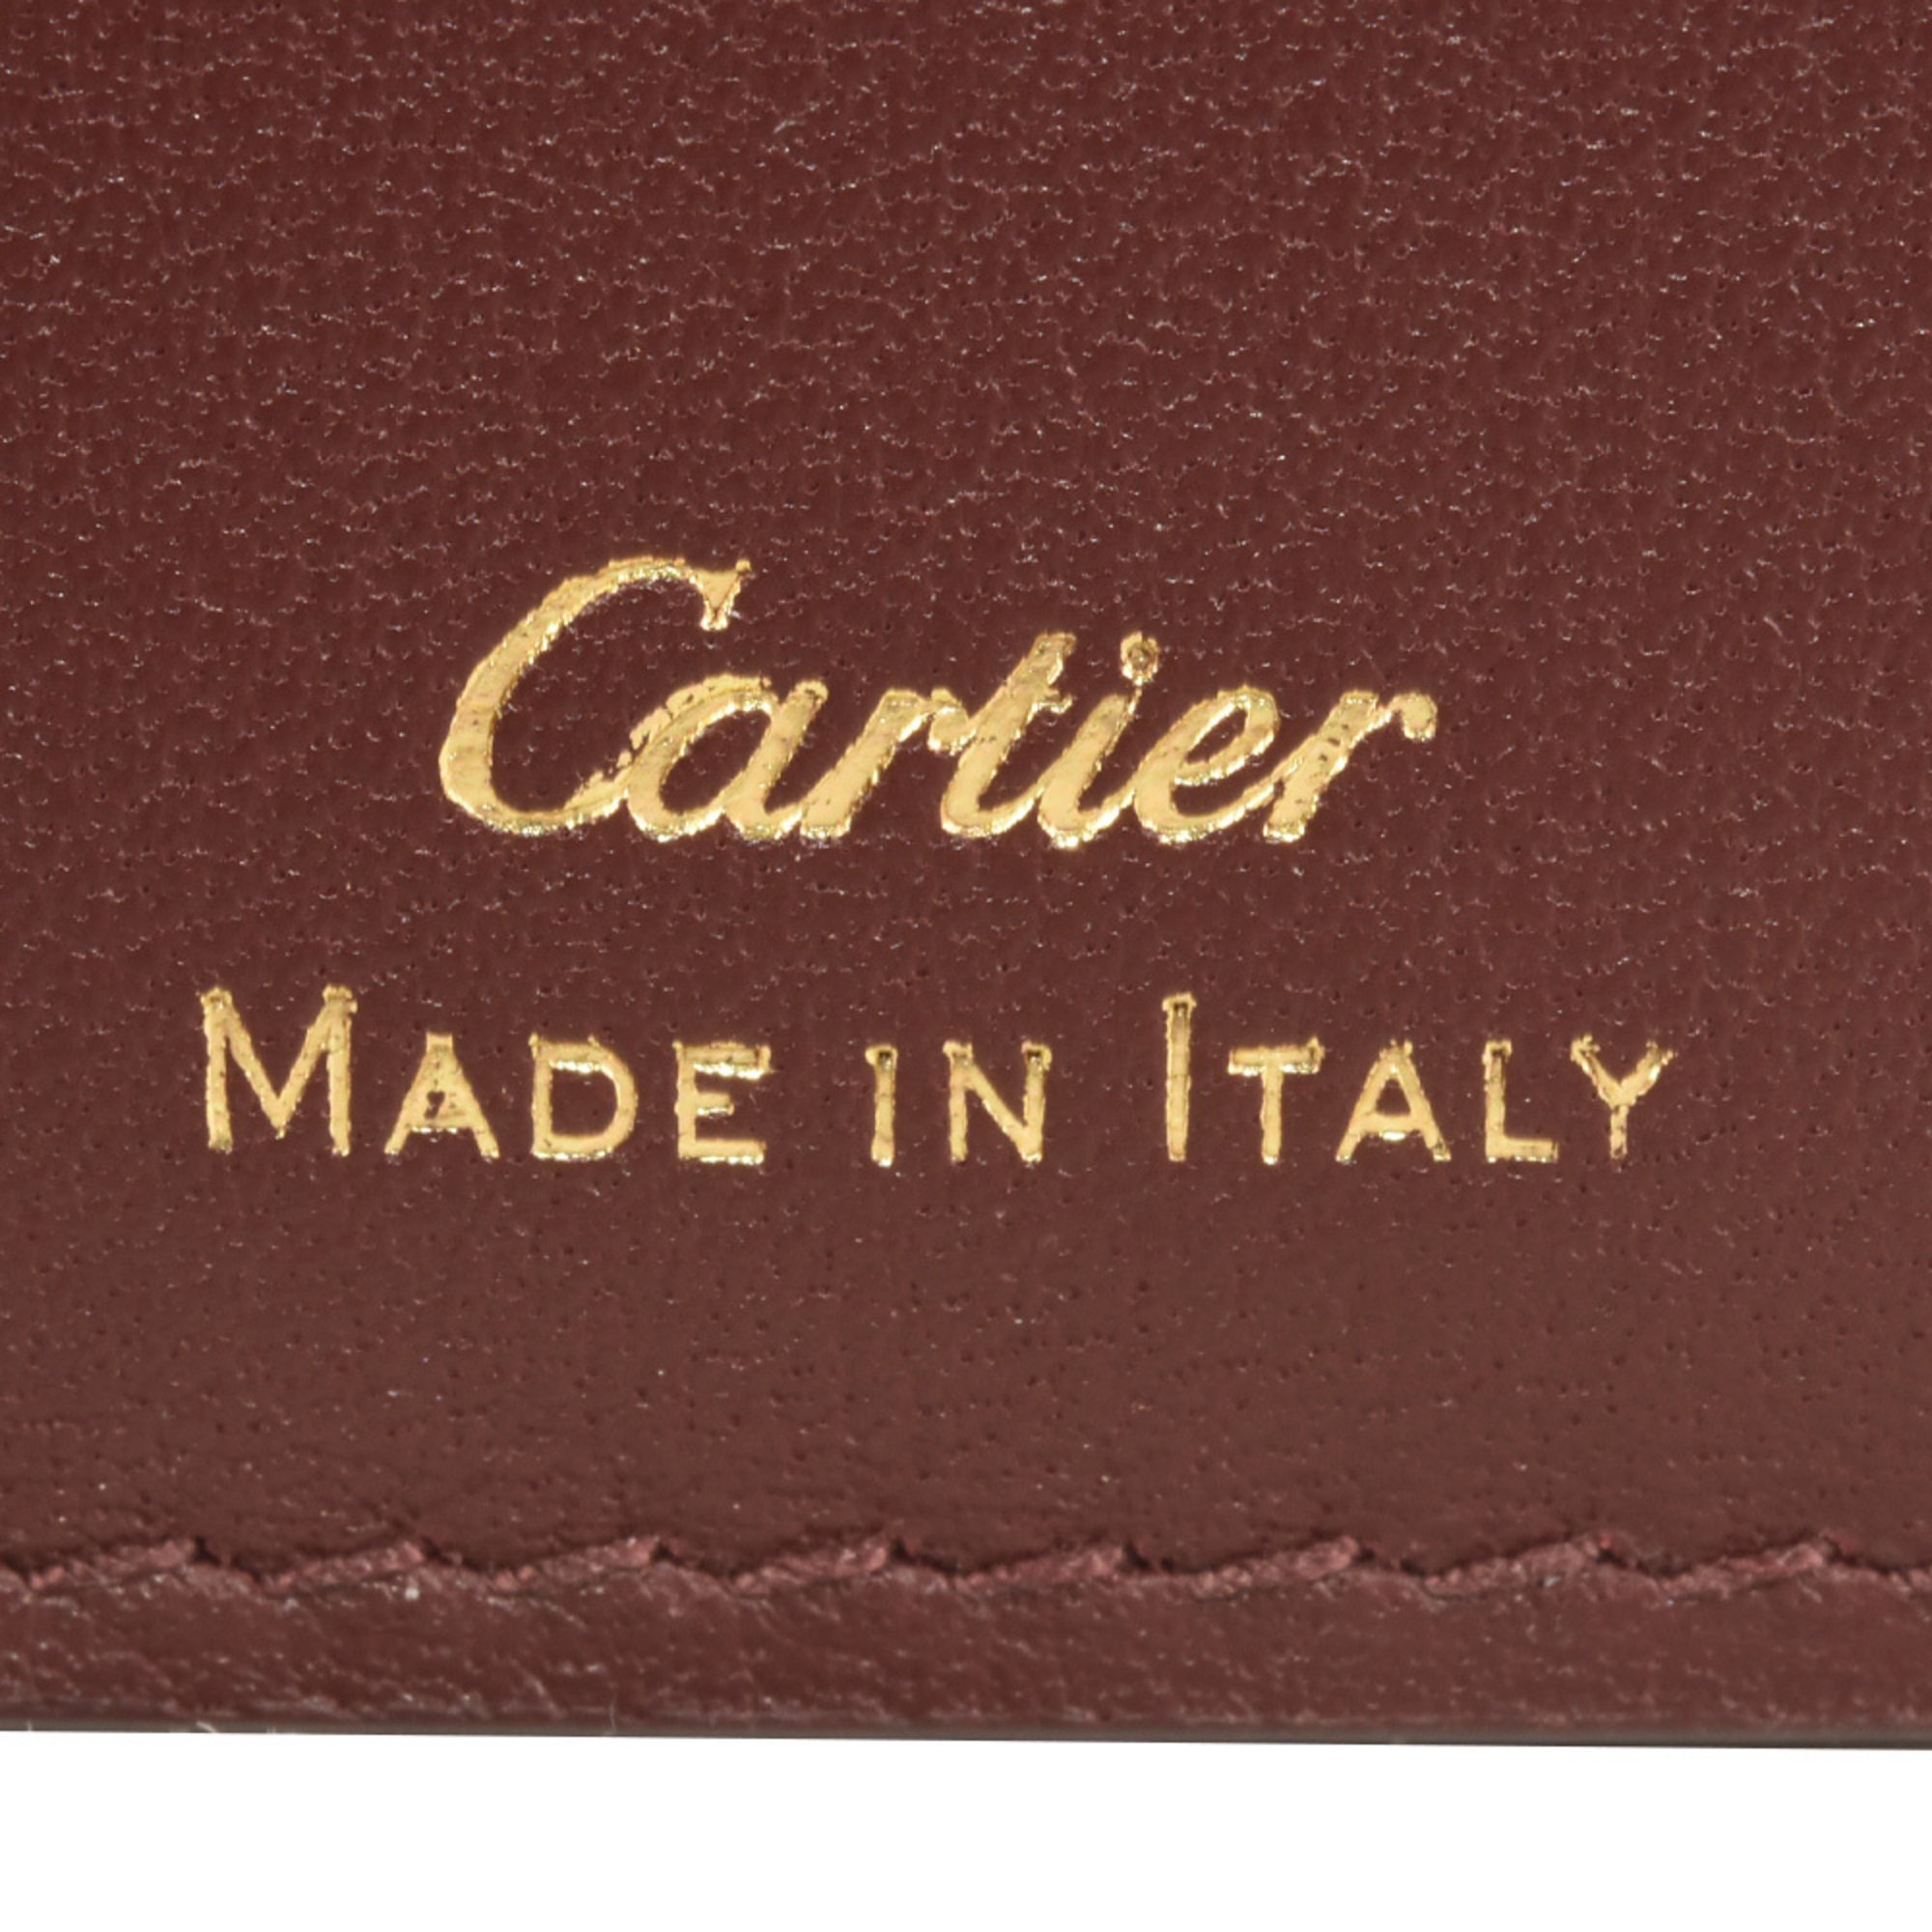 Cartier Must Do Long Wallet Leather L3001760 Red